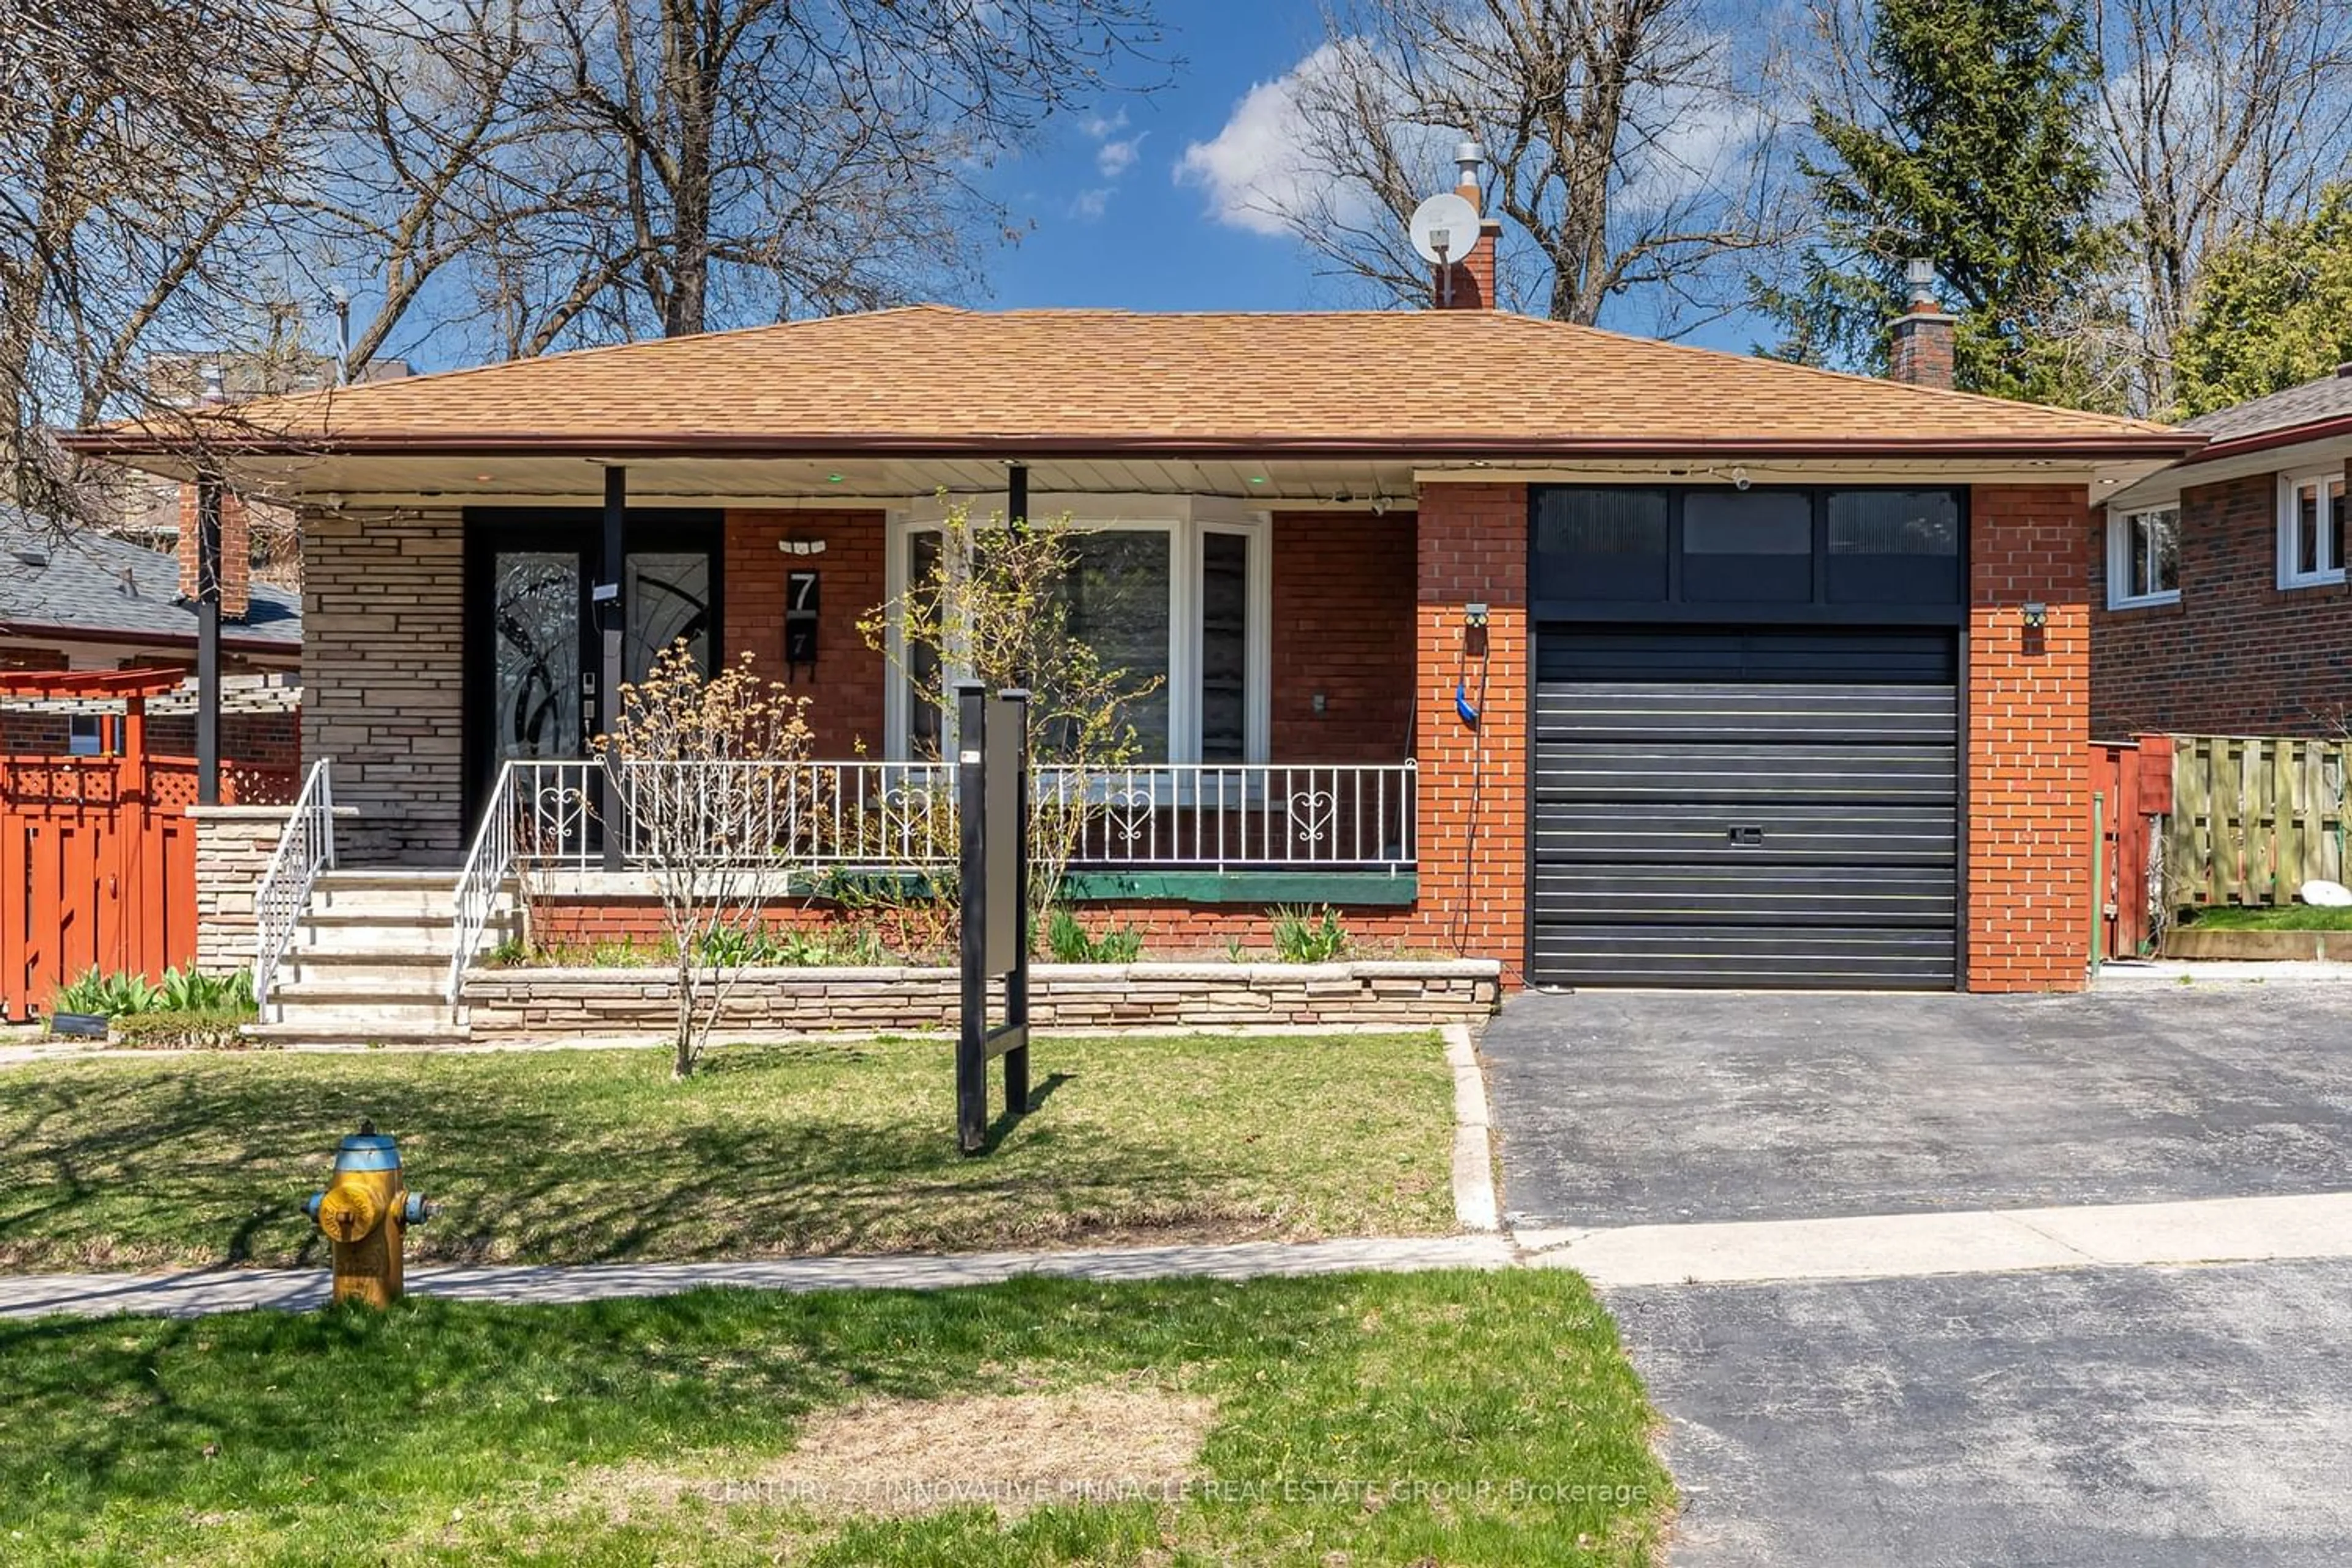 Home with brick exterior material for 7 Stevenwood Rd, Toronto Ontario M1G 1B7